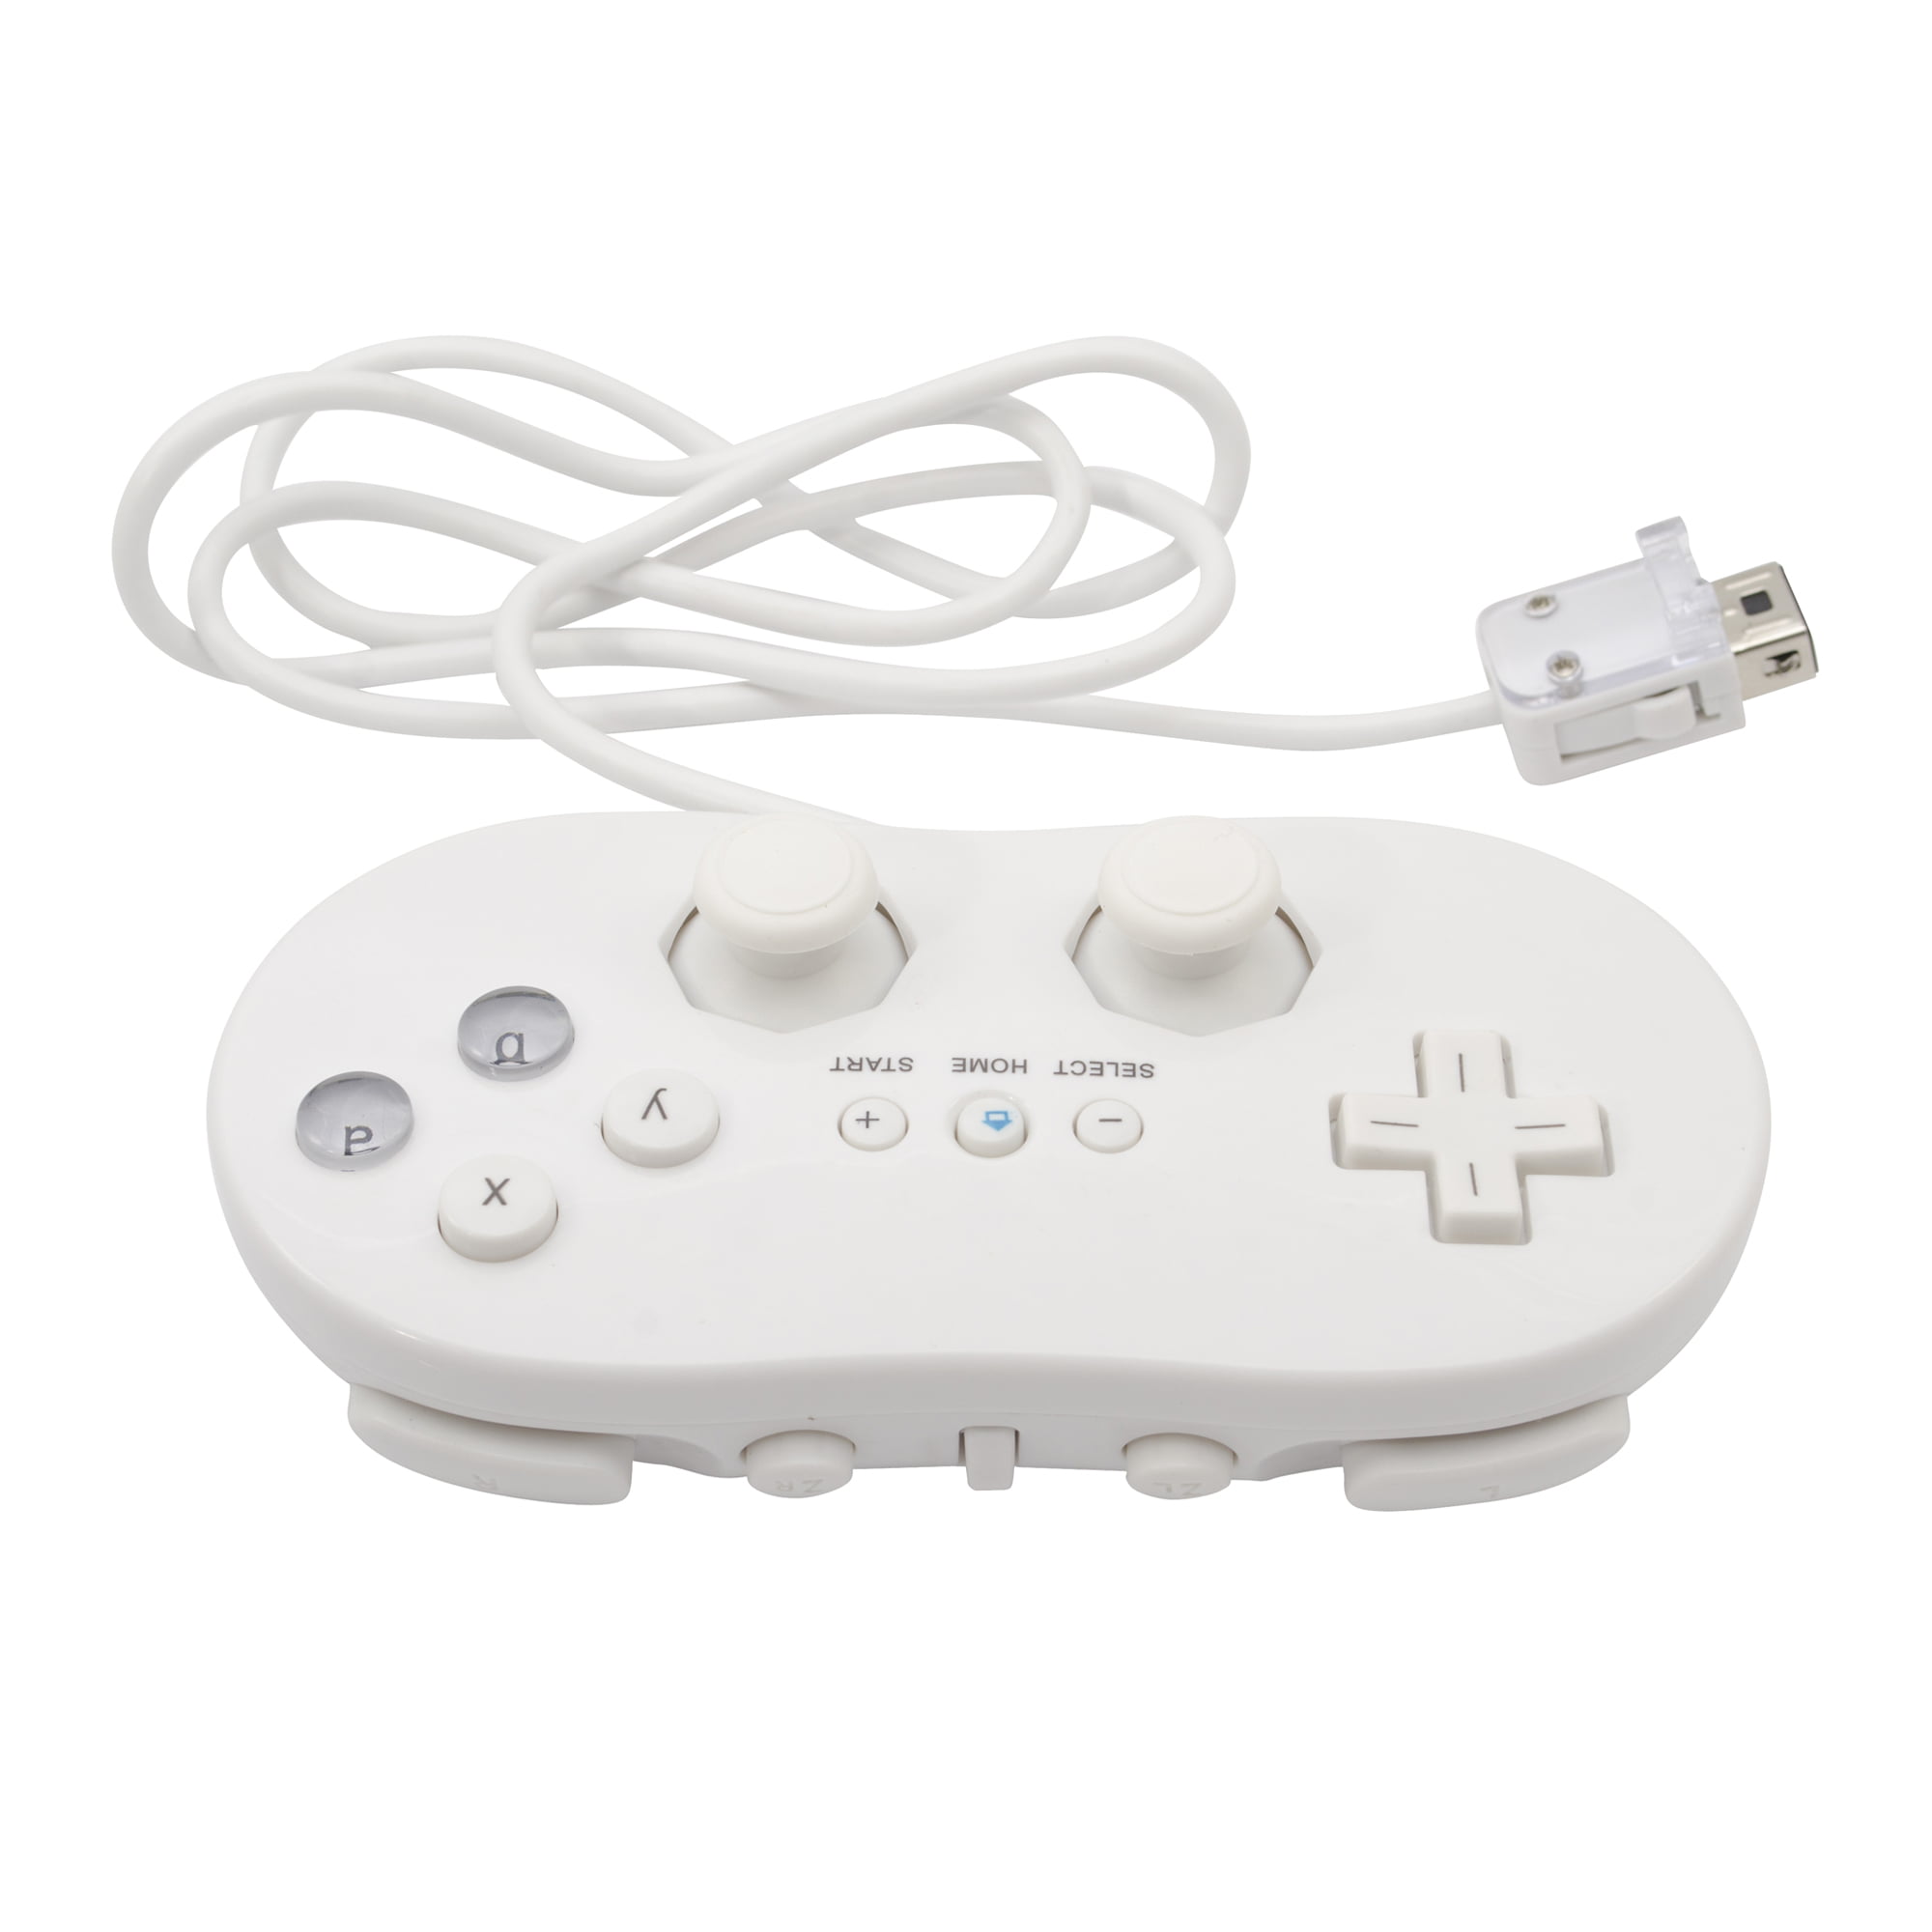 all wii controllers